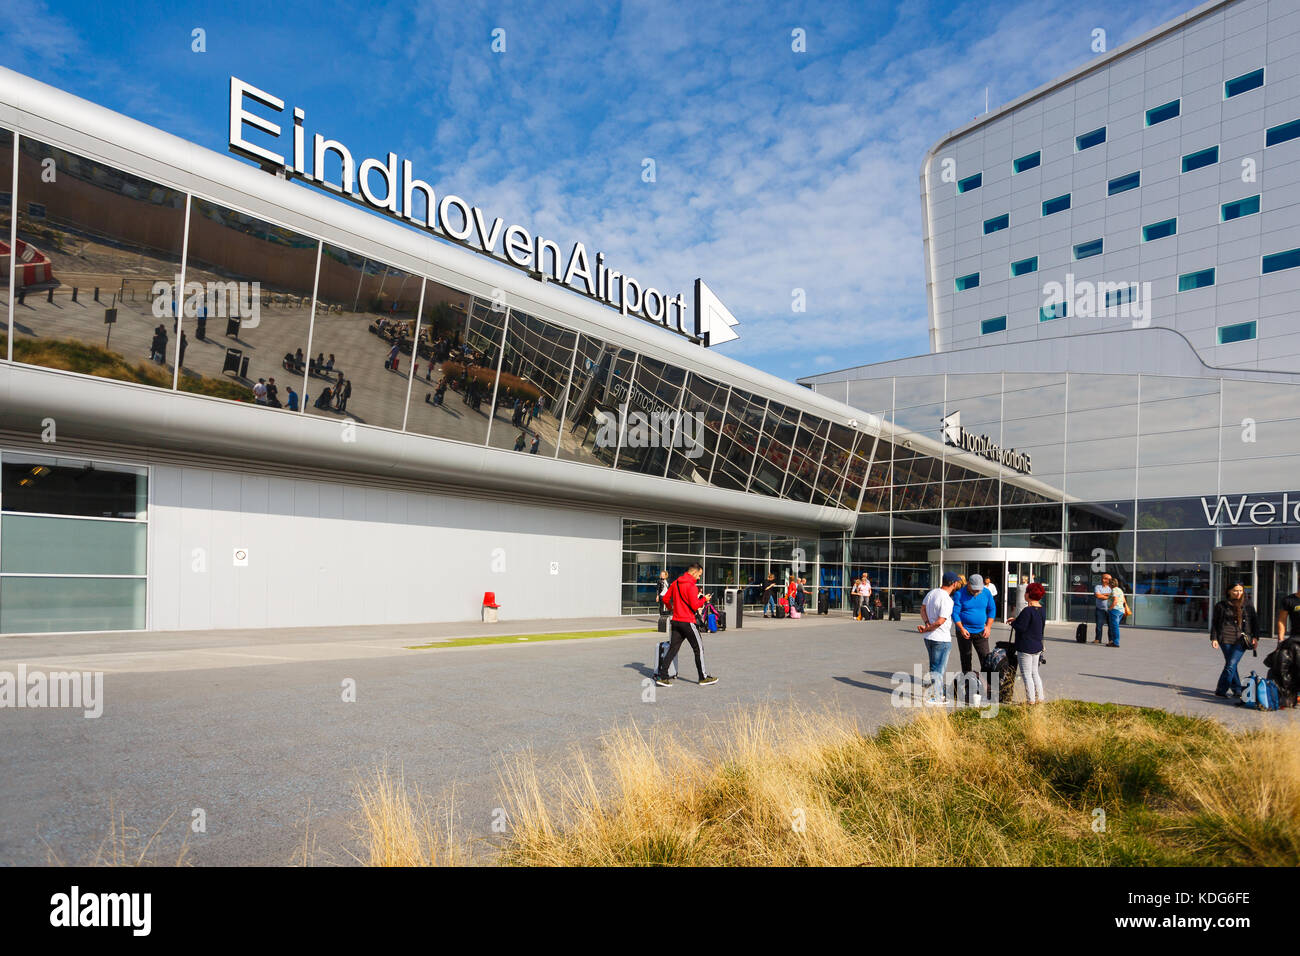 Eindhoven, Netherlands - September 22 2017: Some people are walking nearby the building of airport of Eindhoven Stock Photo